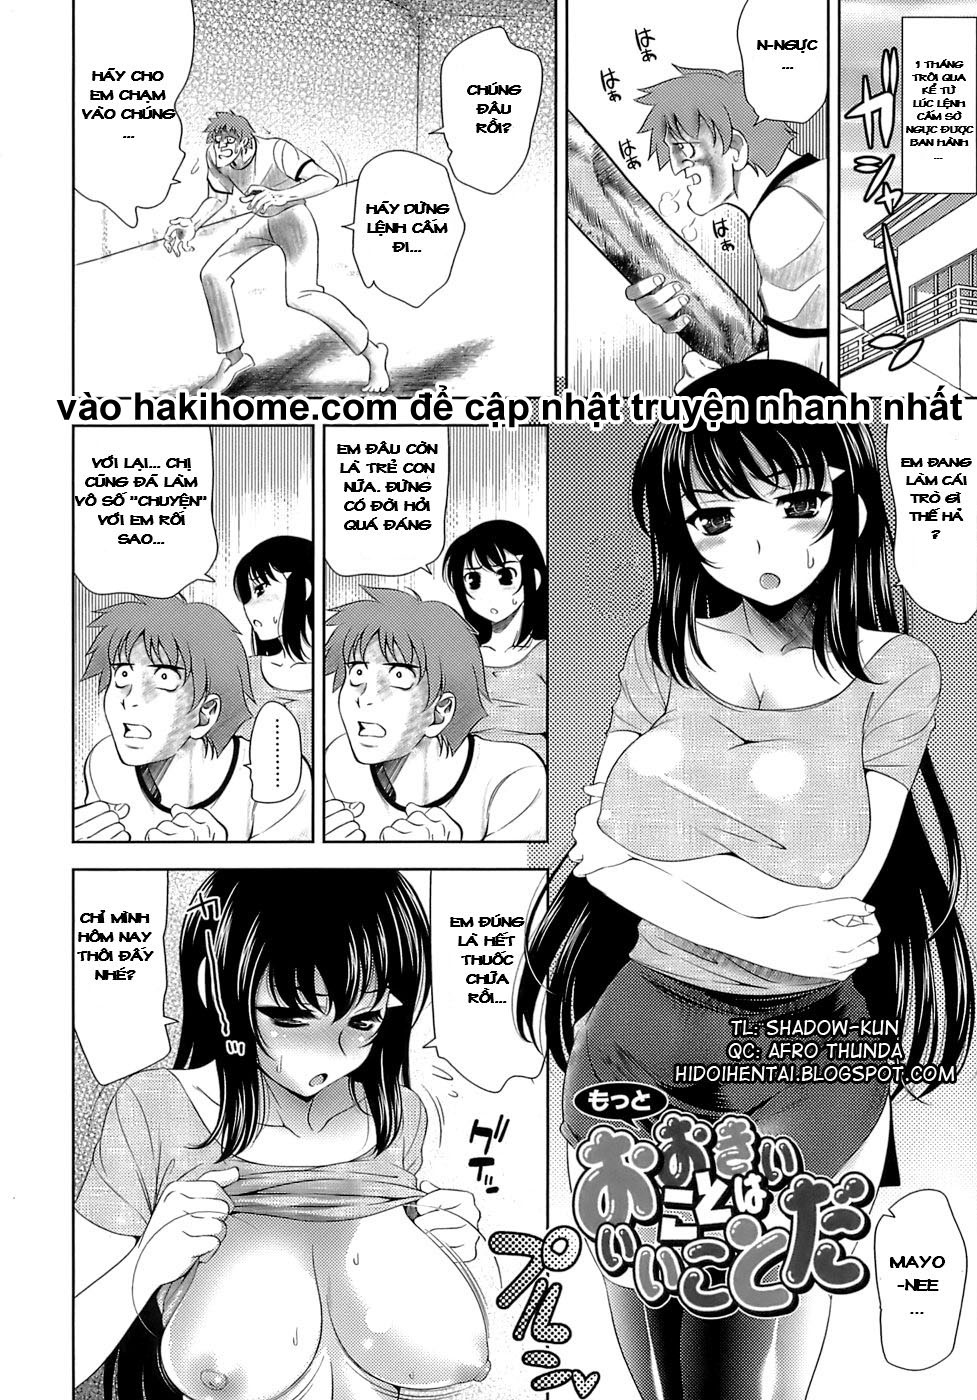 Xem ảnh Let's Fall In Love Like In An Ero-Manga - Chapter 11 END - 1604544966390_0 - Hentai24h.Tv